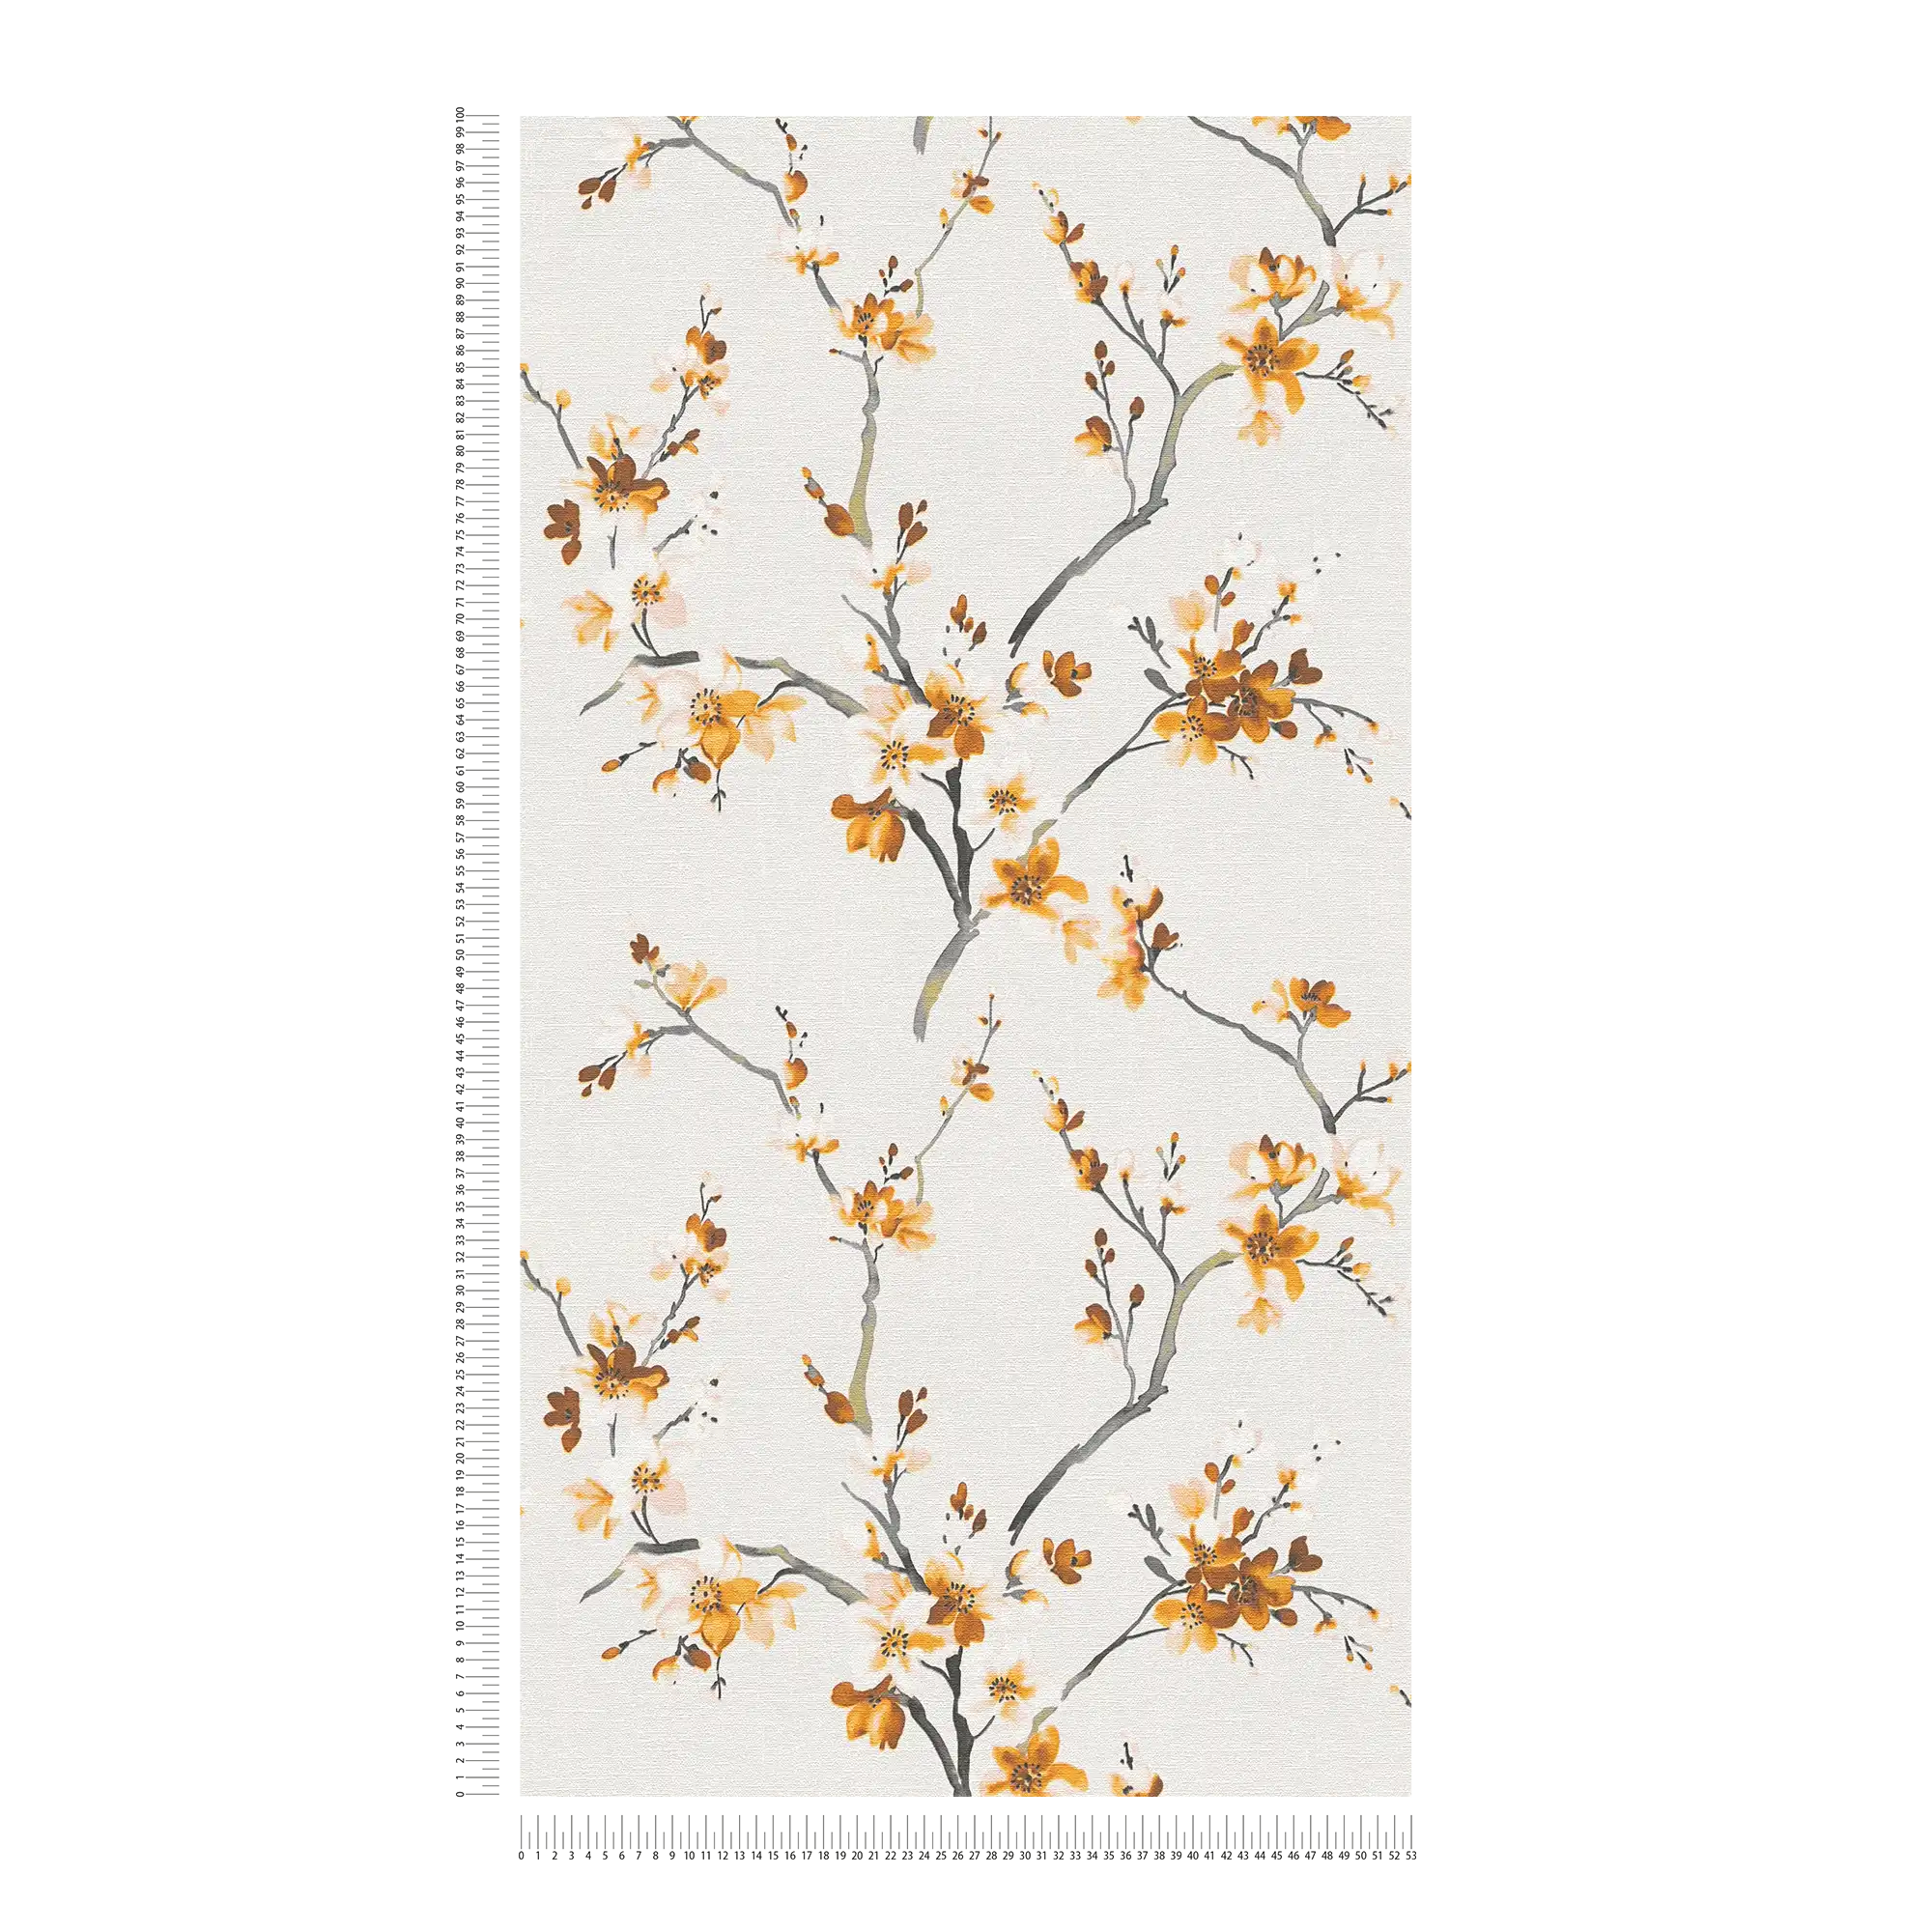             Floral wallpaper mustard yellow floral pattern in watercolour style
        